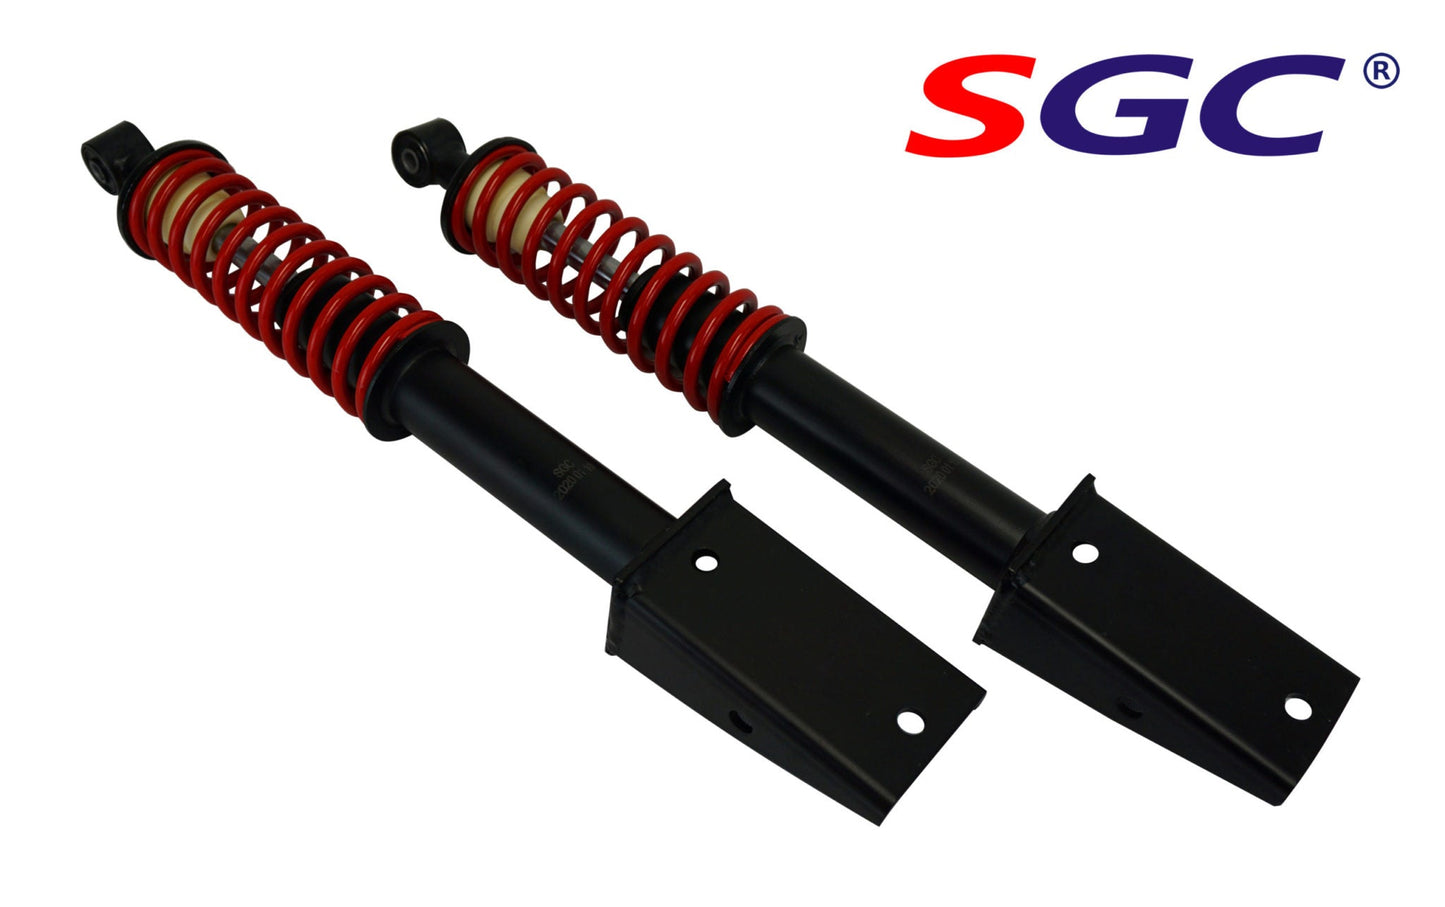 LKTX09 – SGC LIFT KIT - 6" HEAVY DUTY BUILT-IN COIL-OVER SHOCK A-ARM KIT FOR EZGO TXT/PDS (2001.5-2013) ELECTRIC